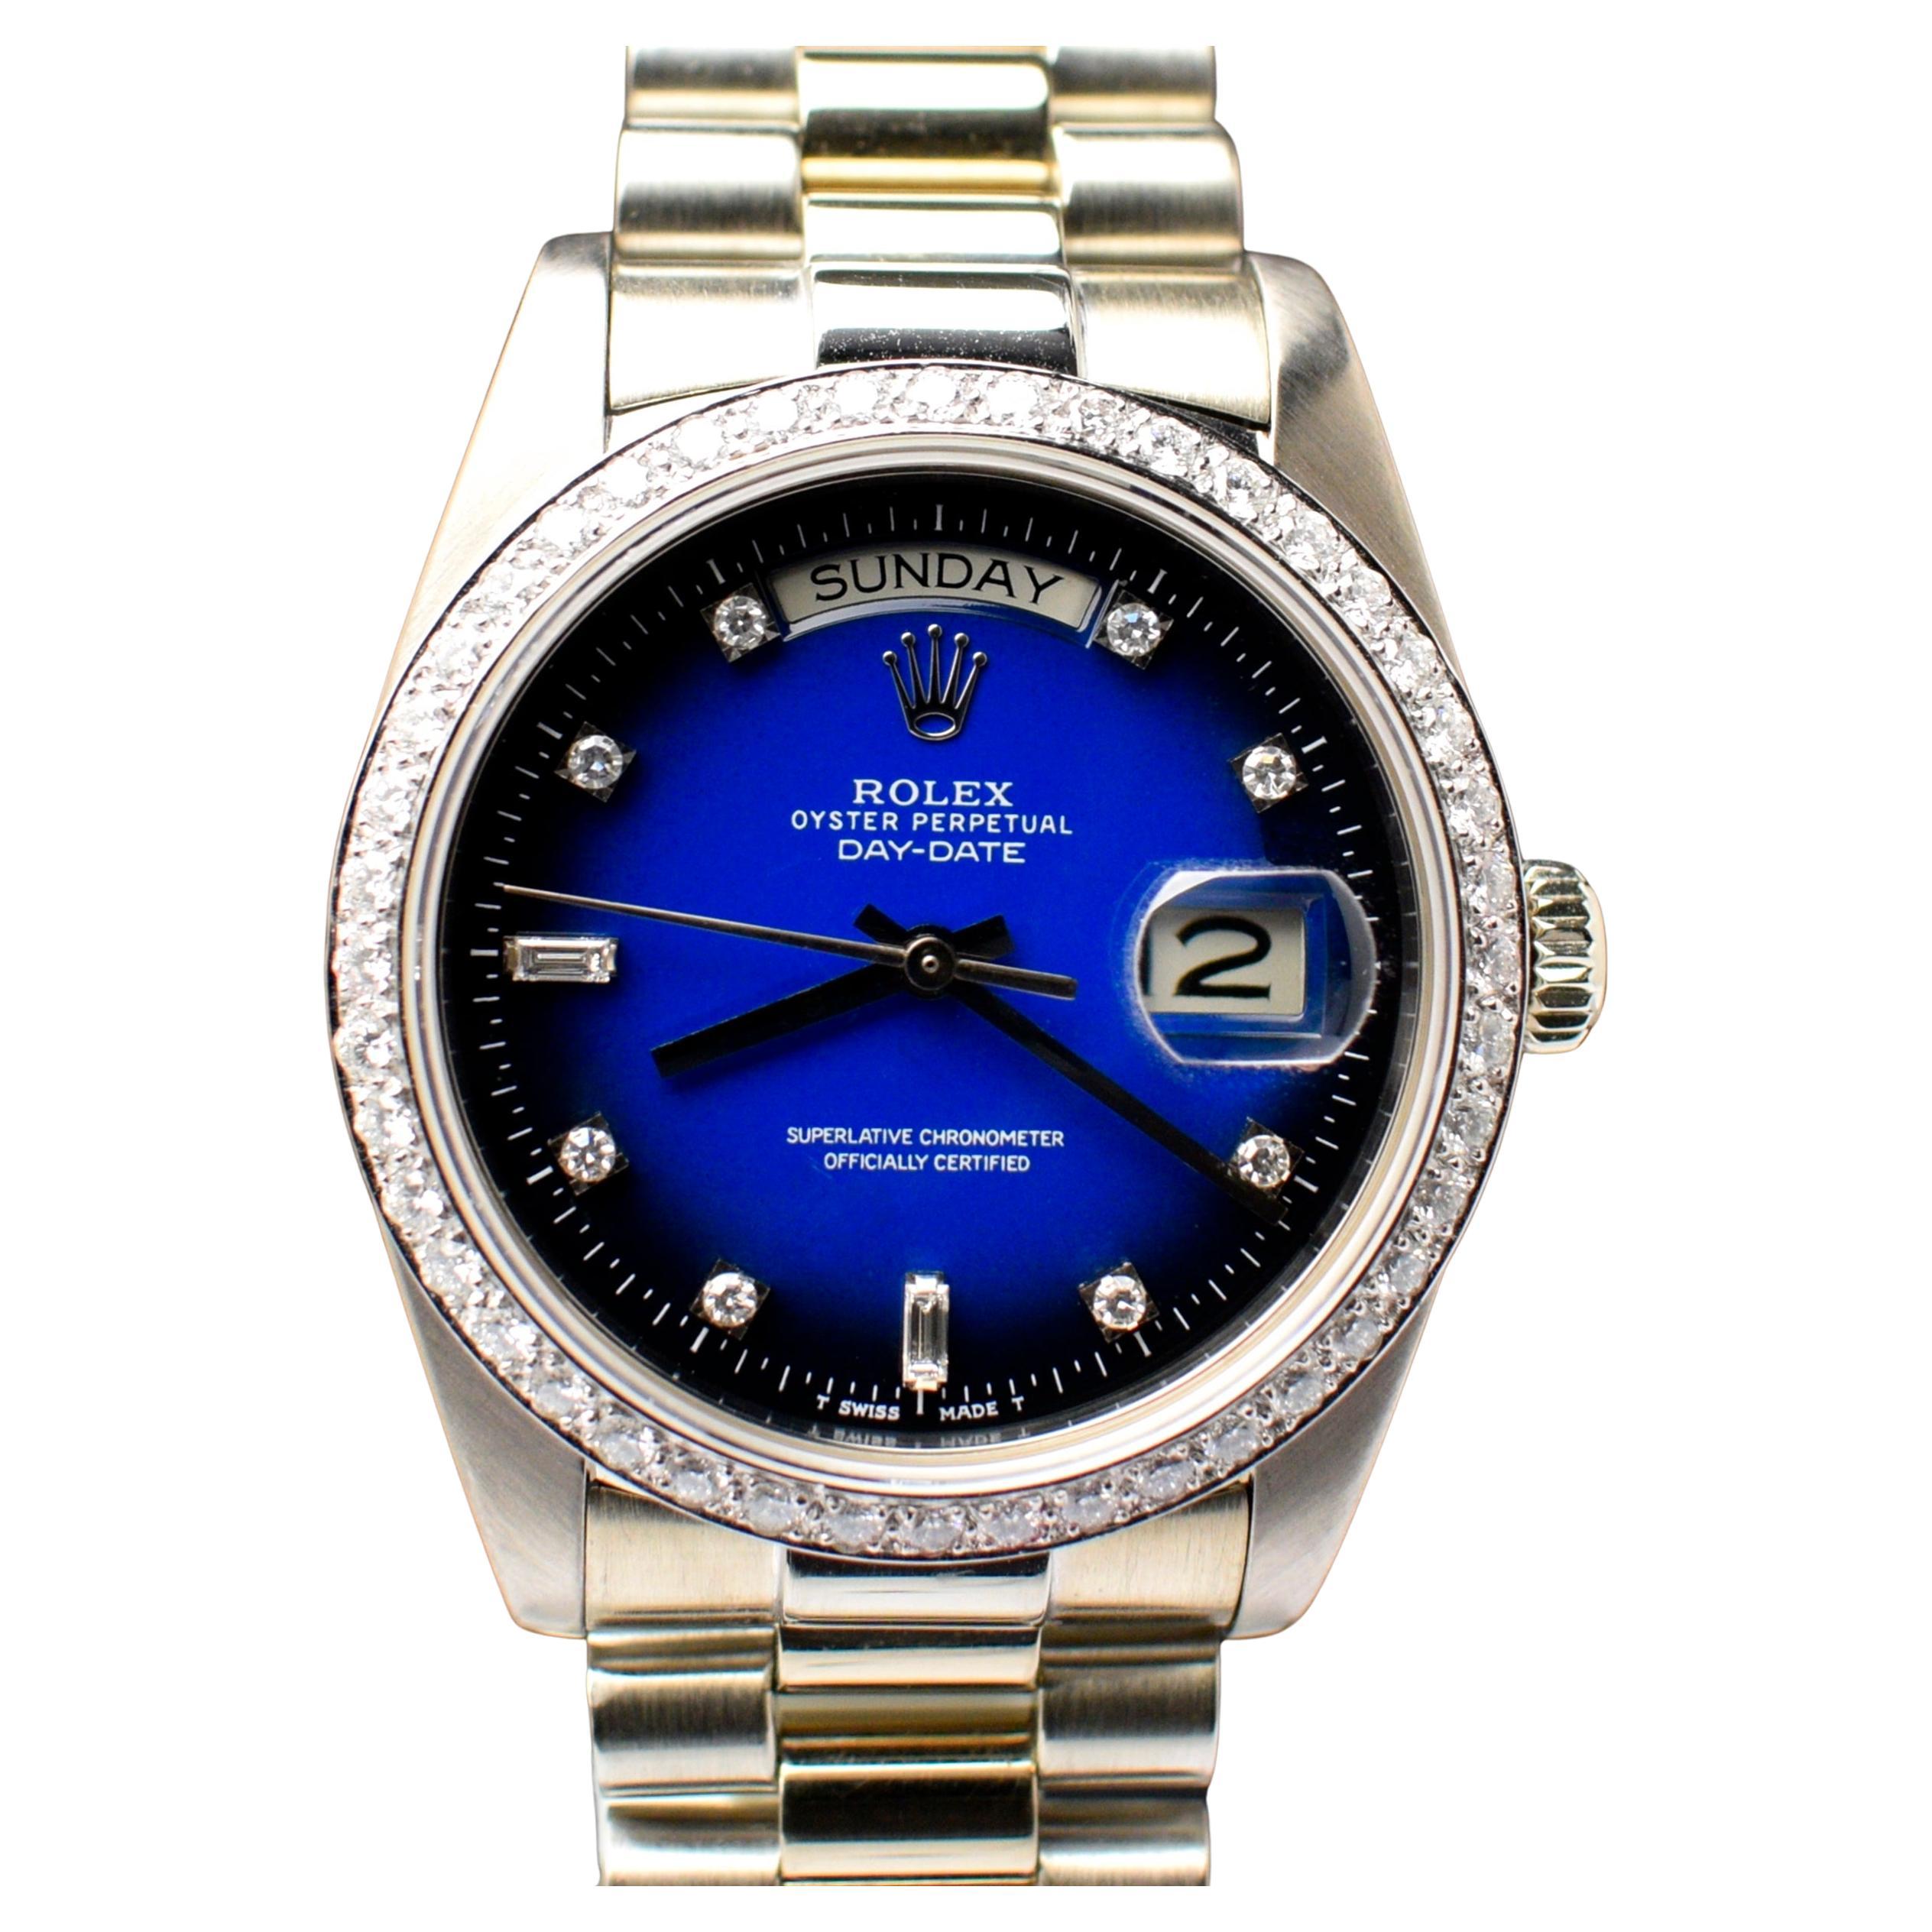 Do all Rolex products have a serial number?